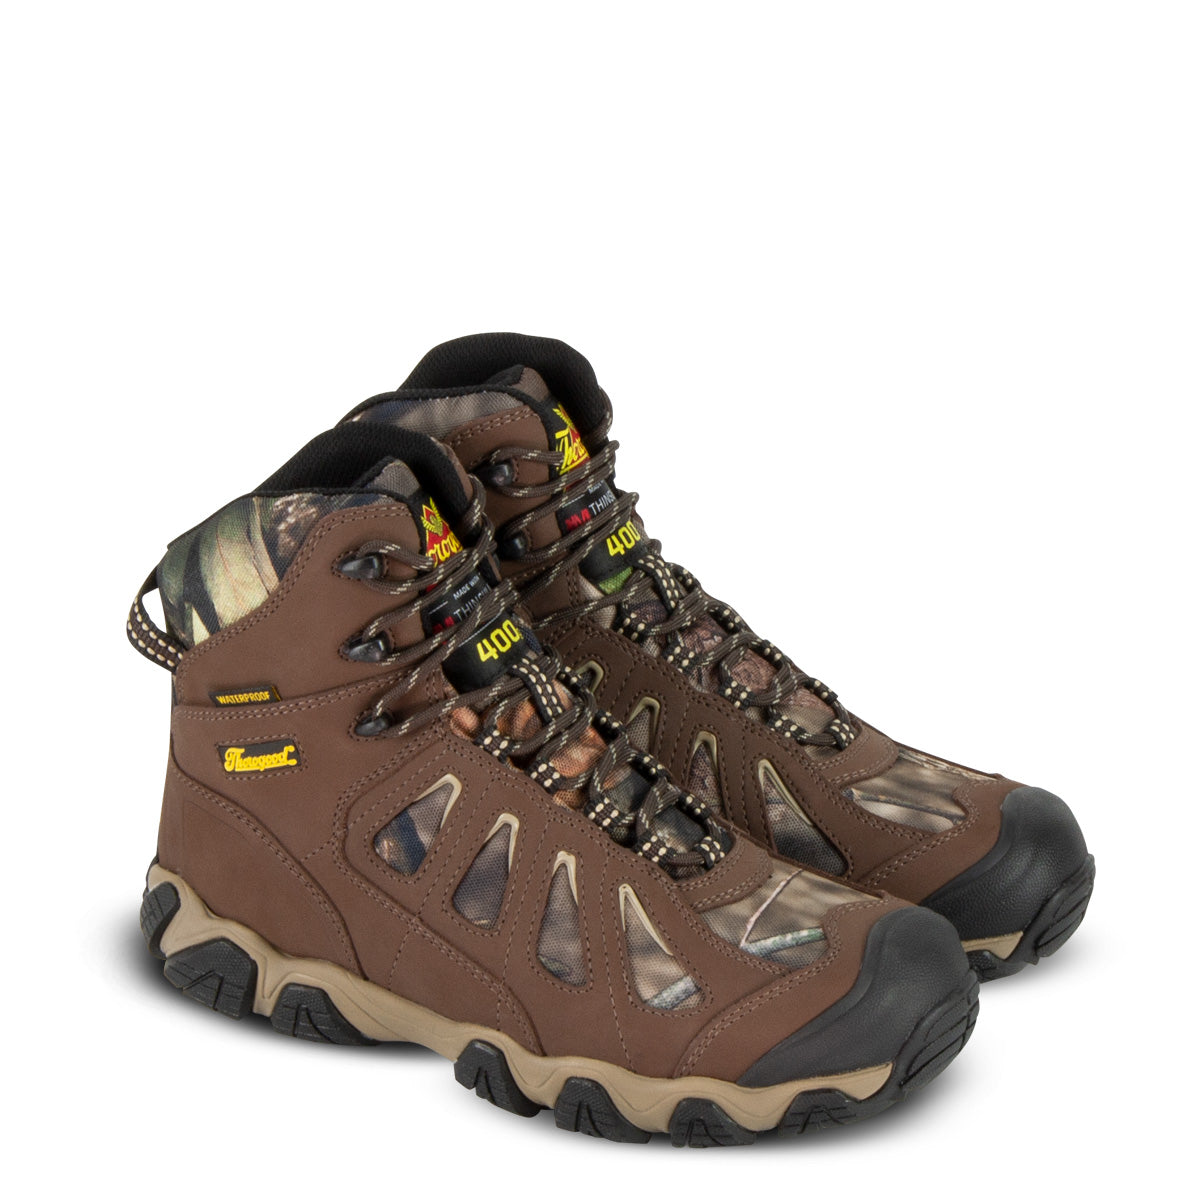 Thorogood Men's Crosstrex Series 6" 400g Insulated Waterproof Hiking Boot in Brown/ Mossy Oat® from the side